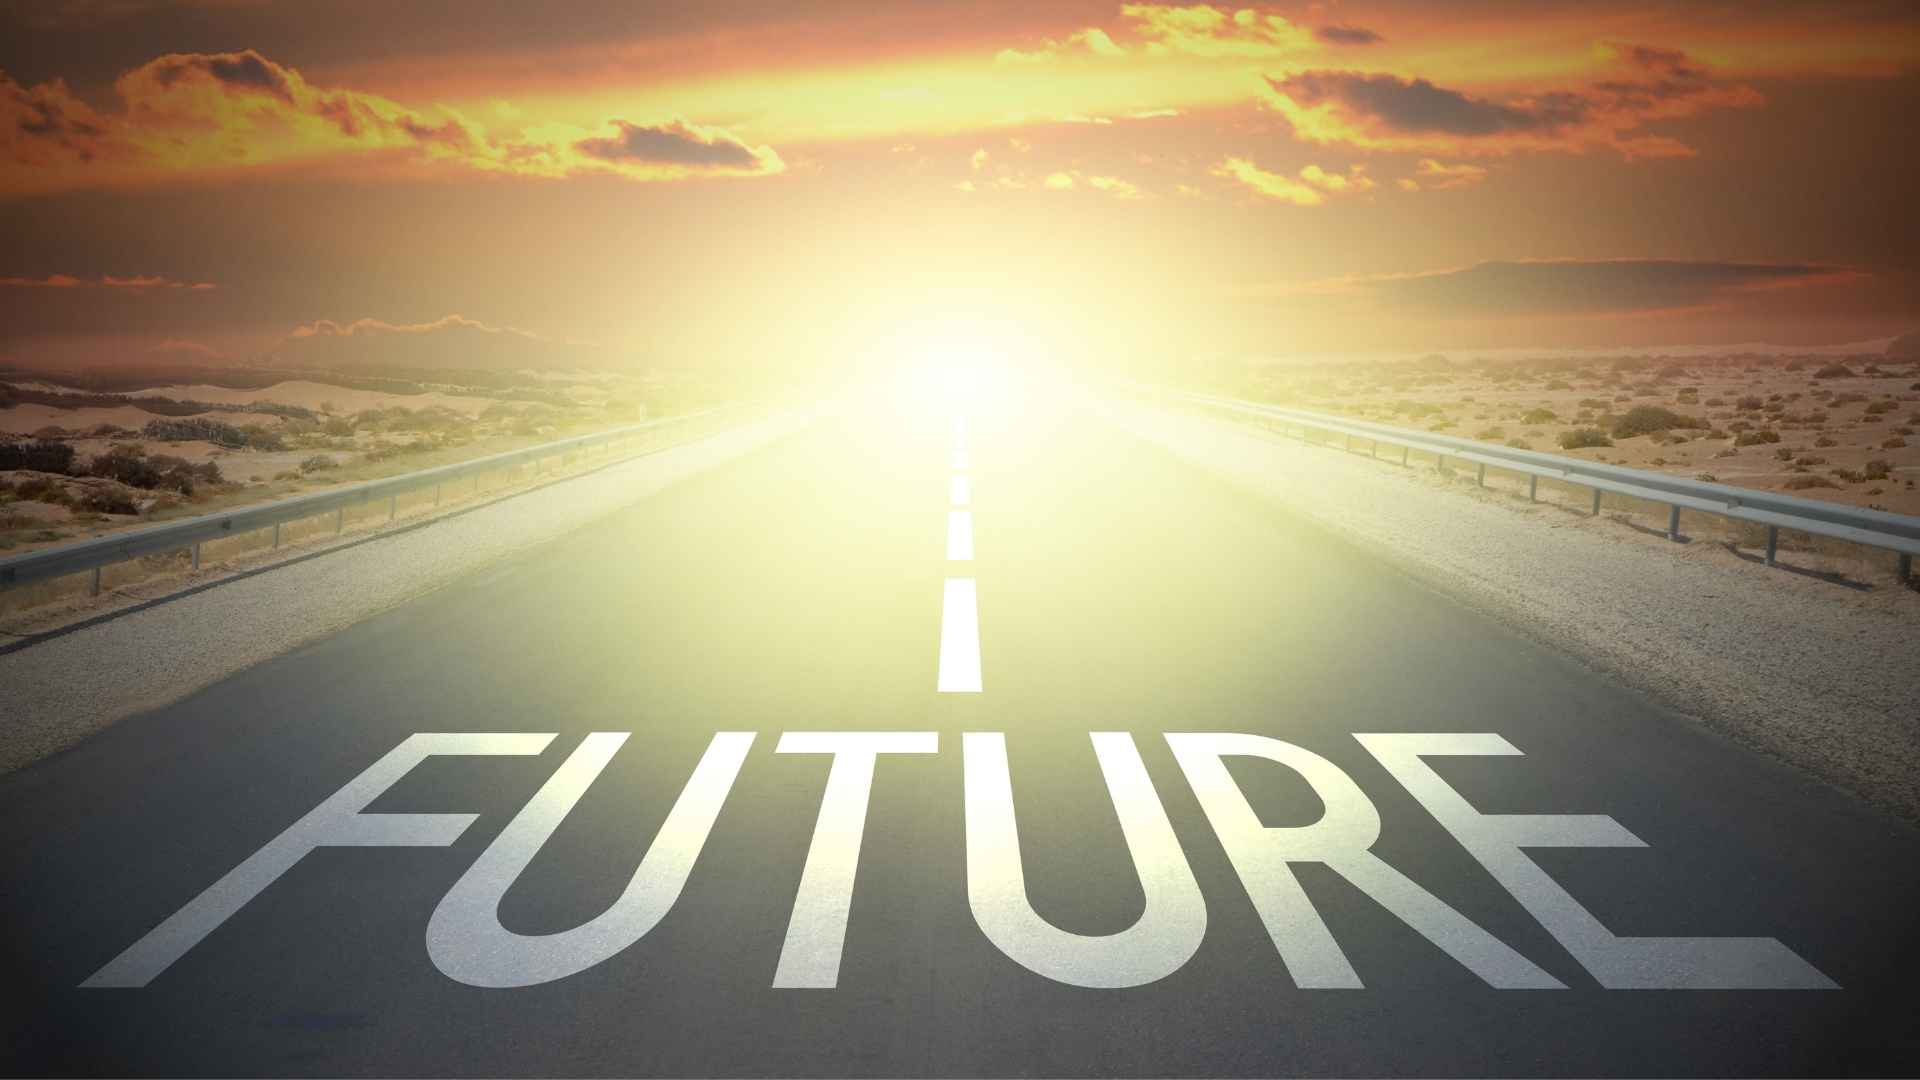 the word future on a road